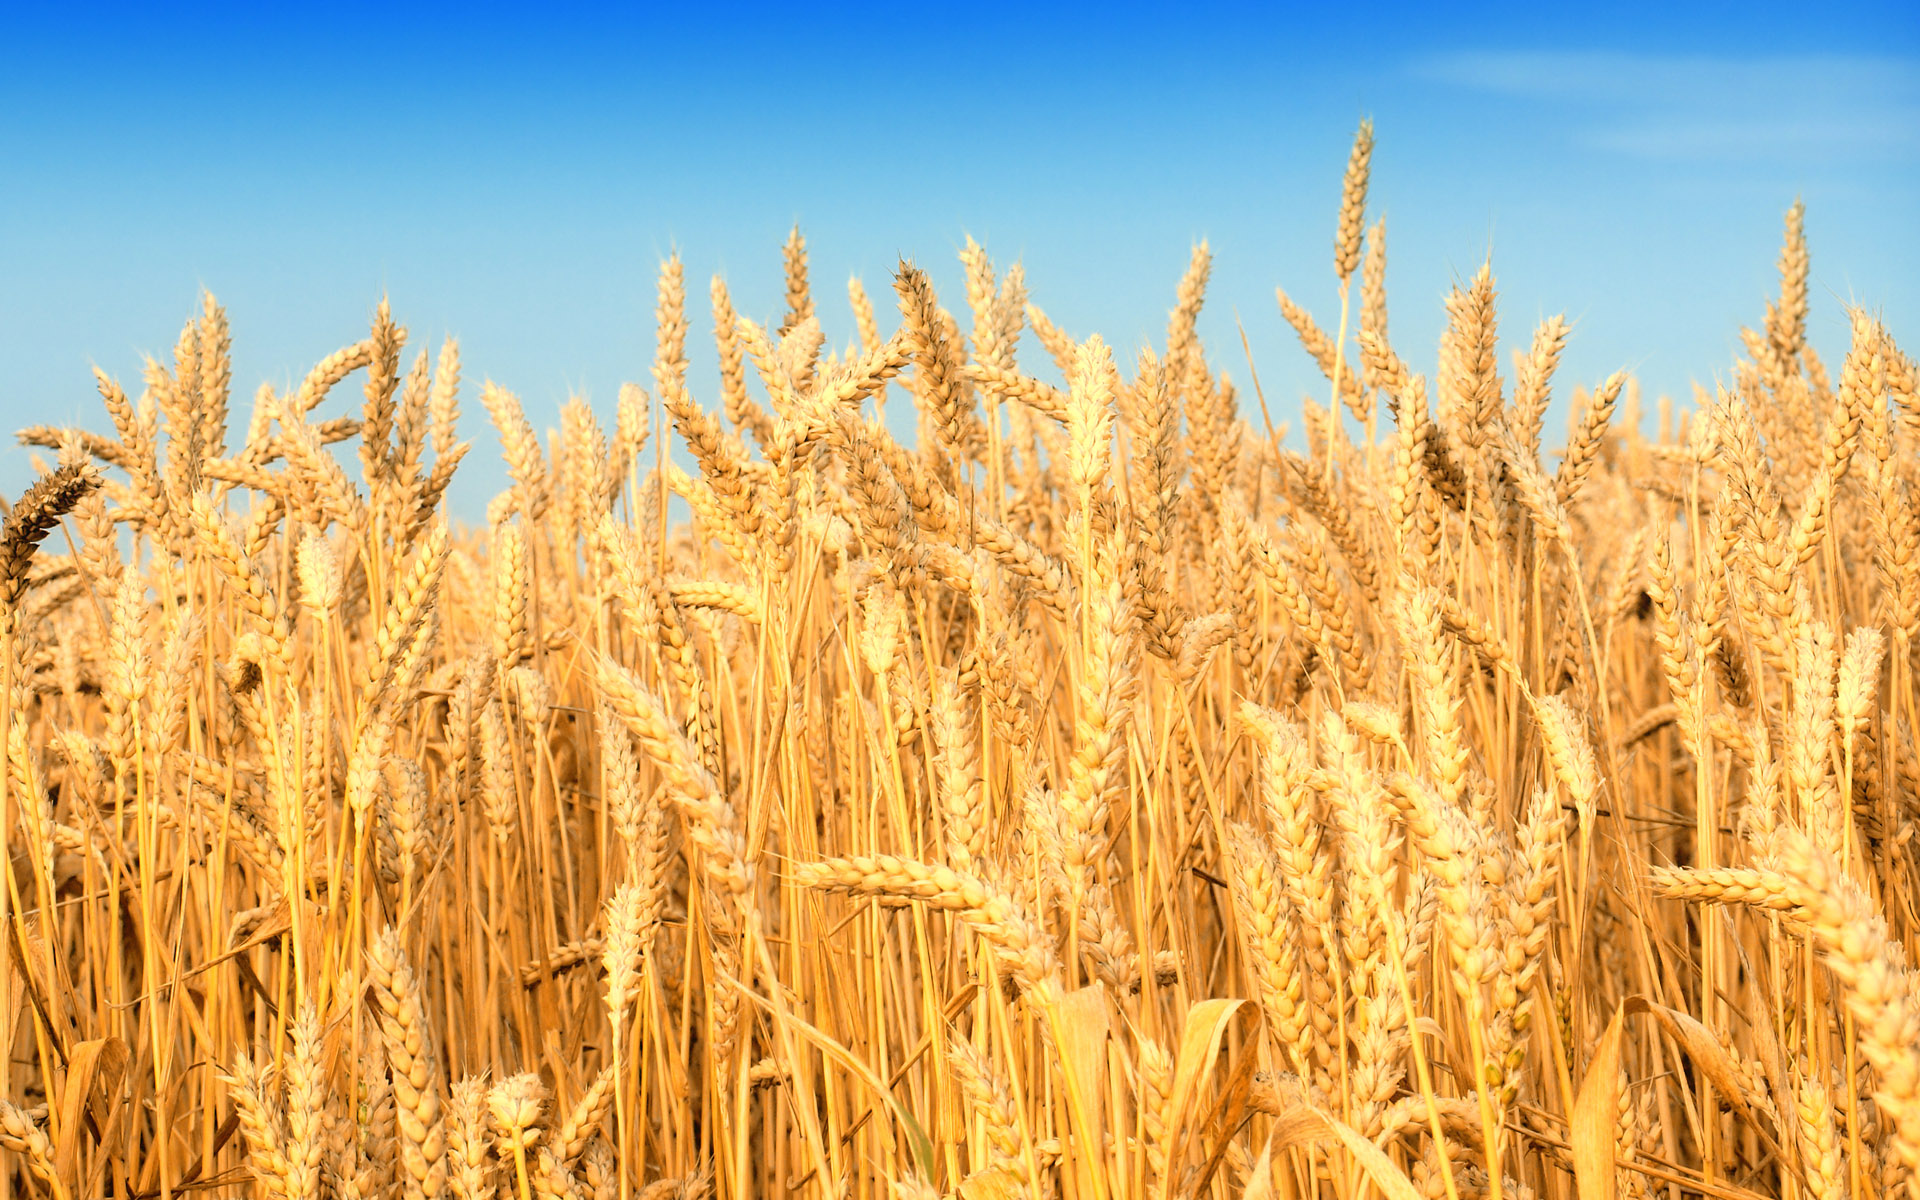 US weather fears which have sent wheat prices soaring are “unlikely to prove long-lasting support”, Rabobank warned, also urging against over-optimism on ...